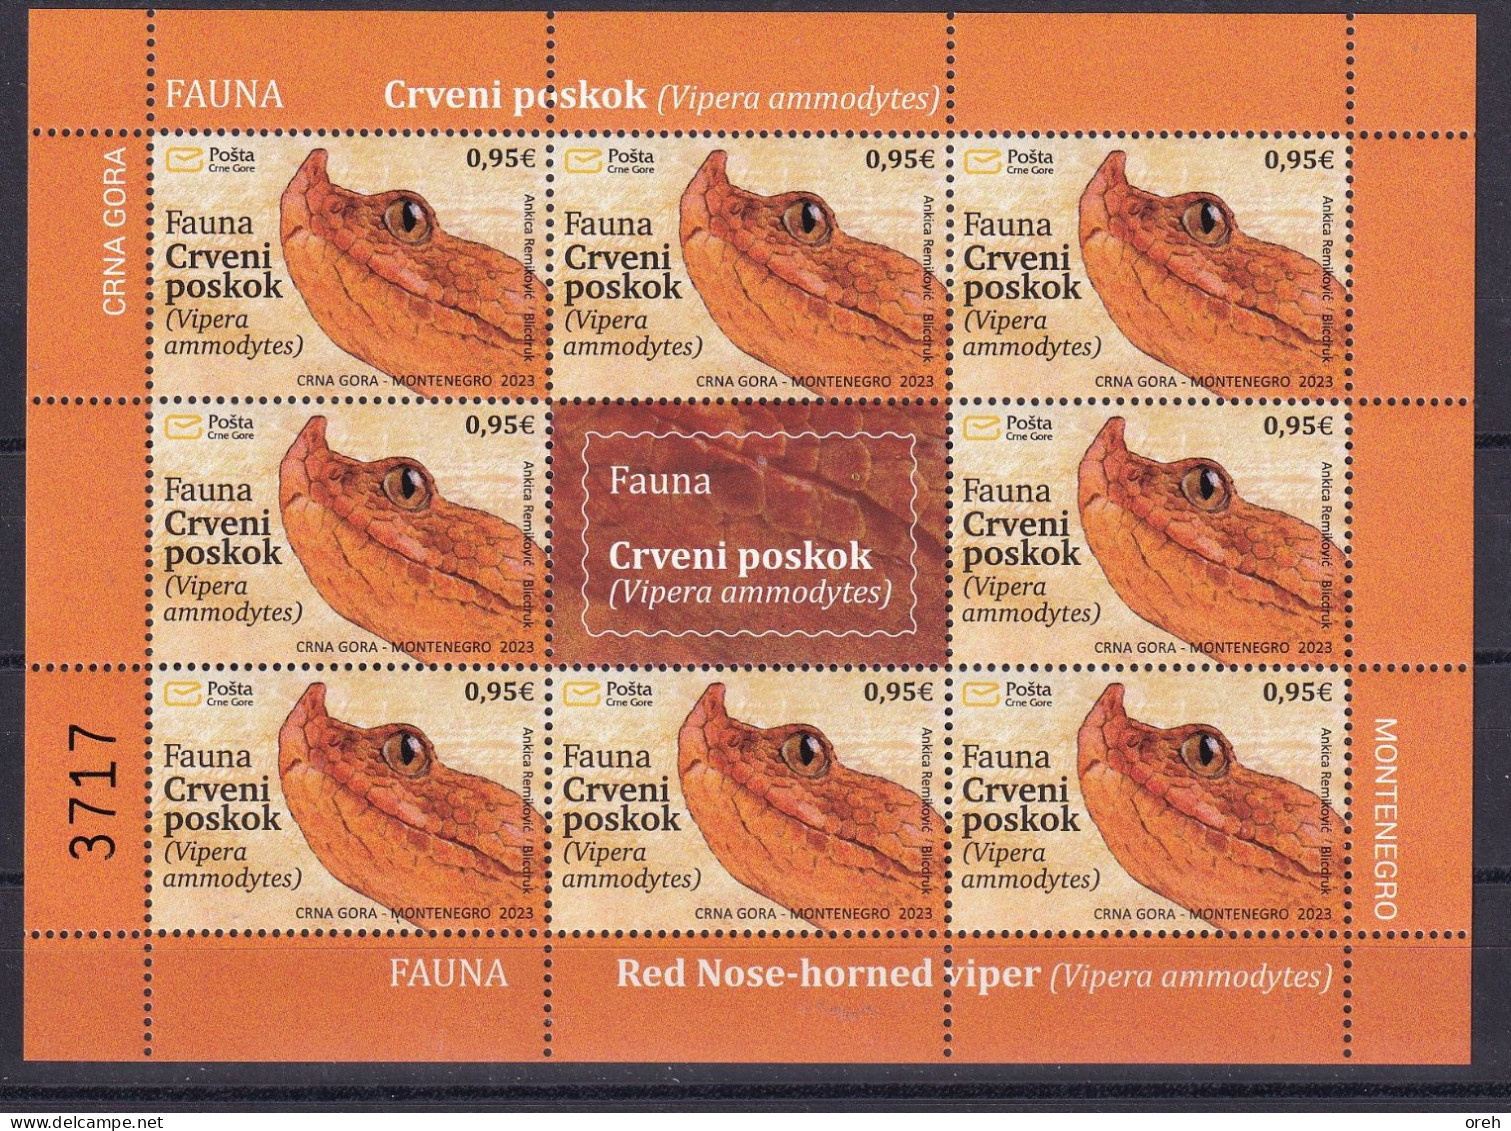 MONTENEGRO 2023,FAUNA,SNAKES,RED NOSE,HORNED VIPER,SHEET,WIGNETTE,MNH - Snakes